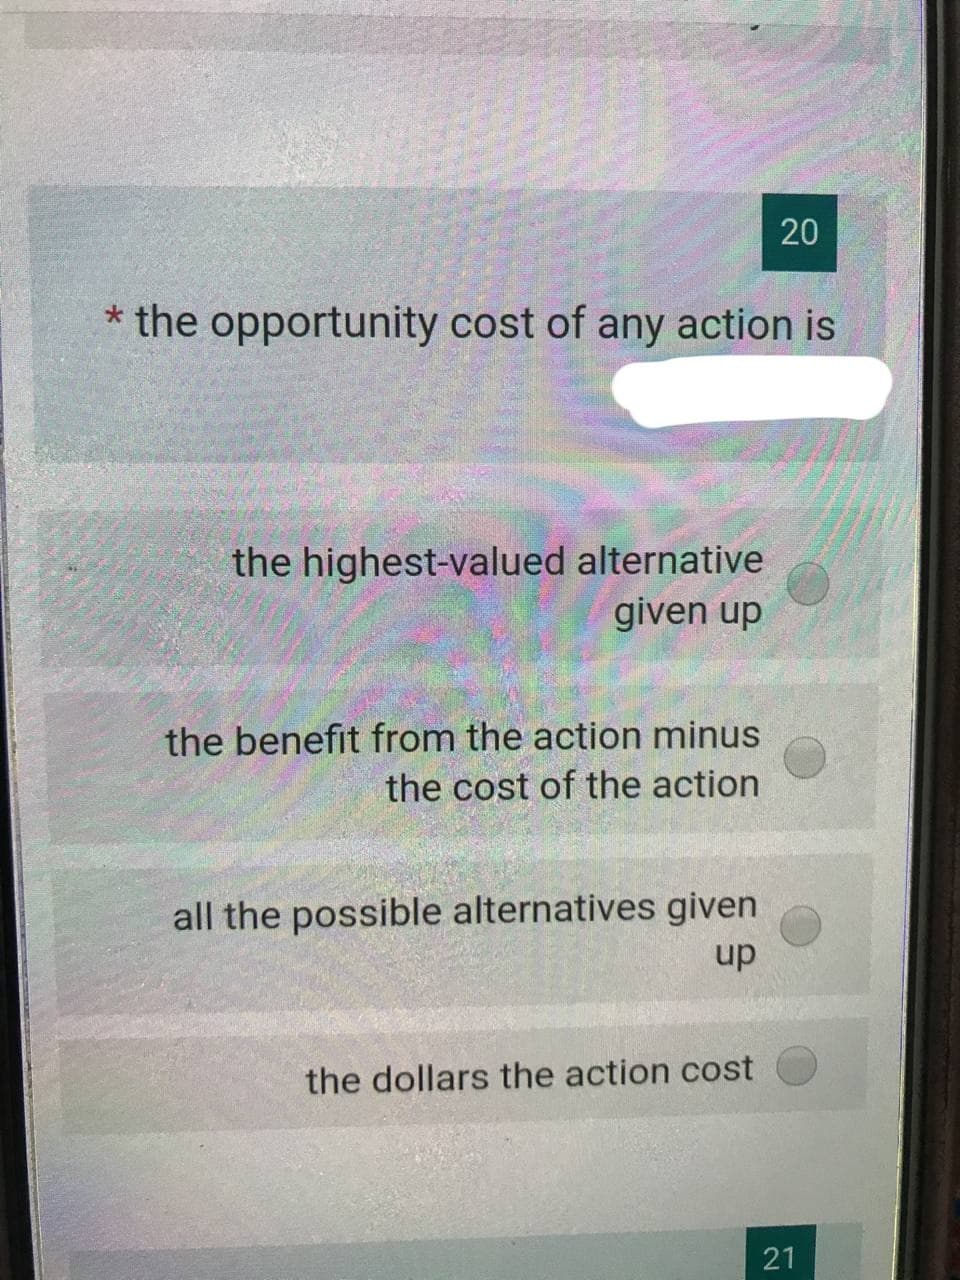 20
* the opportunity cost of any action is
the highest-valued alternative
given up
the benefit from the action minus
the cost of the action
all the possible alternatives given
up
the dollars the action cost
21
